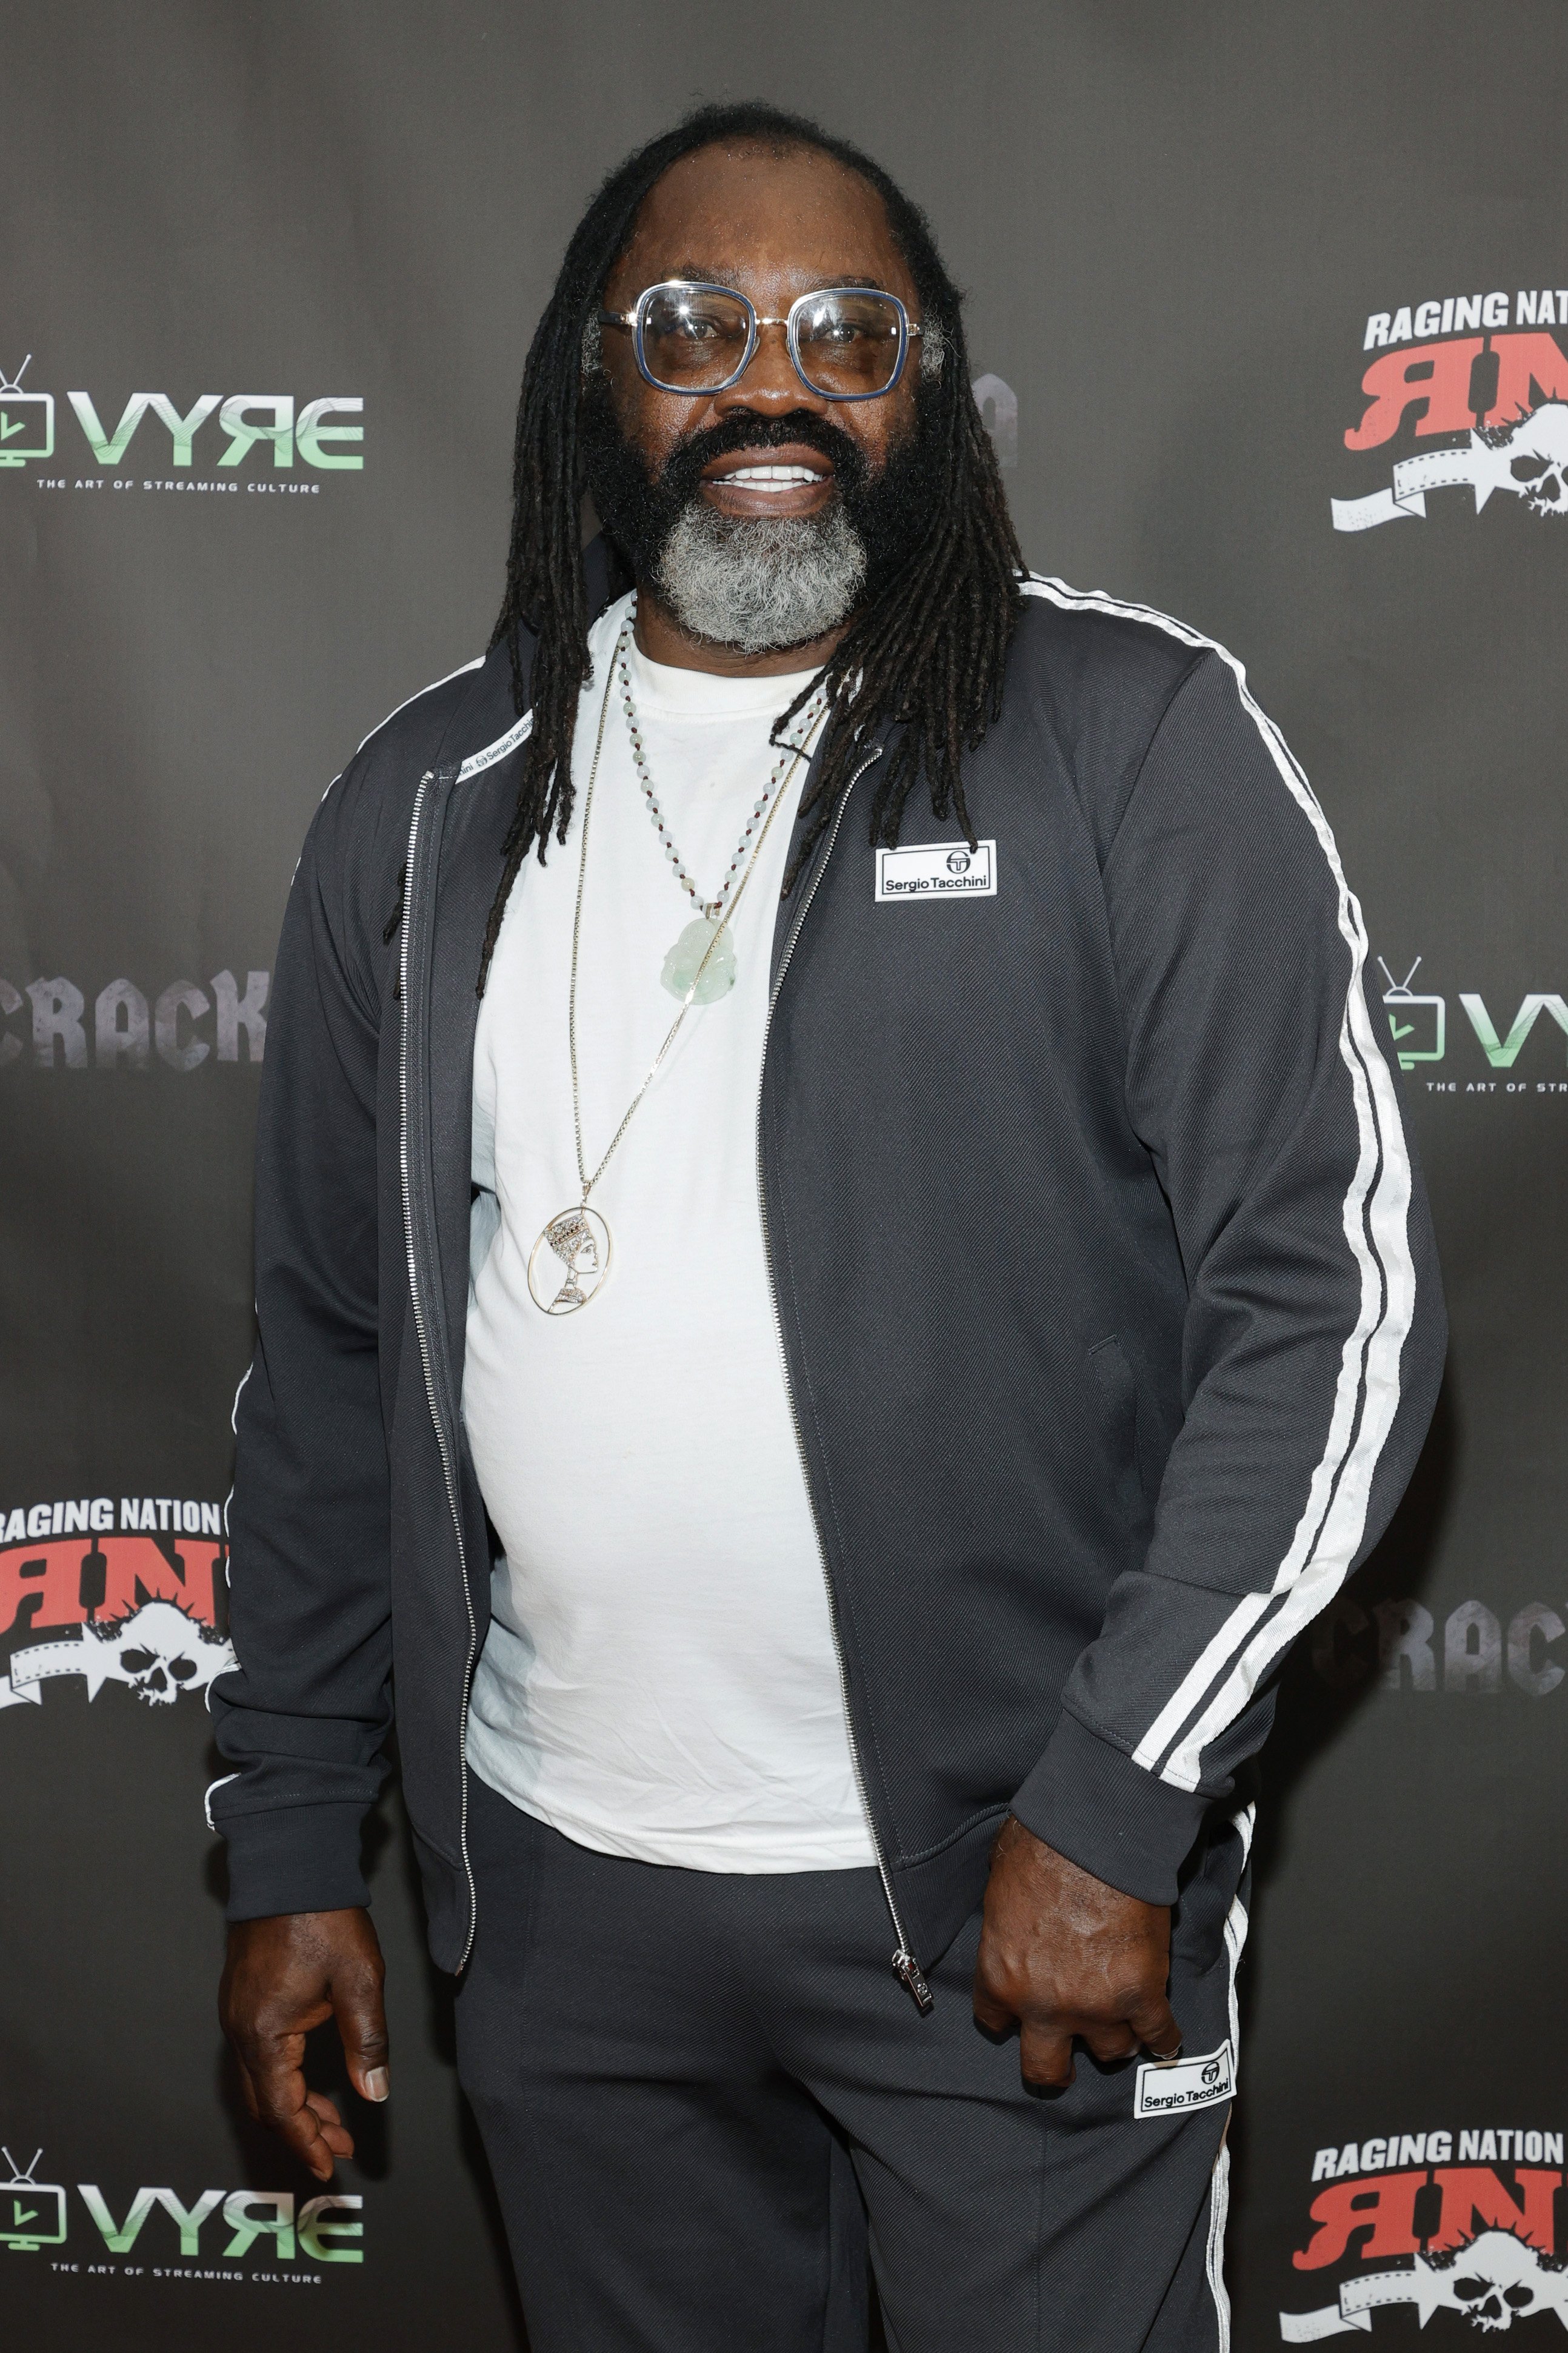 Kazembe Ajamu Coleman attends the red carpet premiere of "Cracka" at Arena Cinelounge Sunset on June 17, 2021 in Los Angeles, California | Source: Getty Images